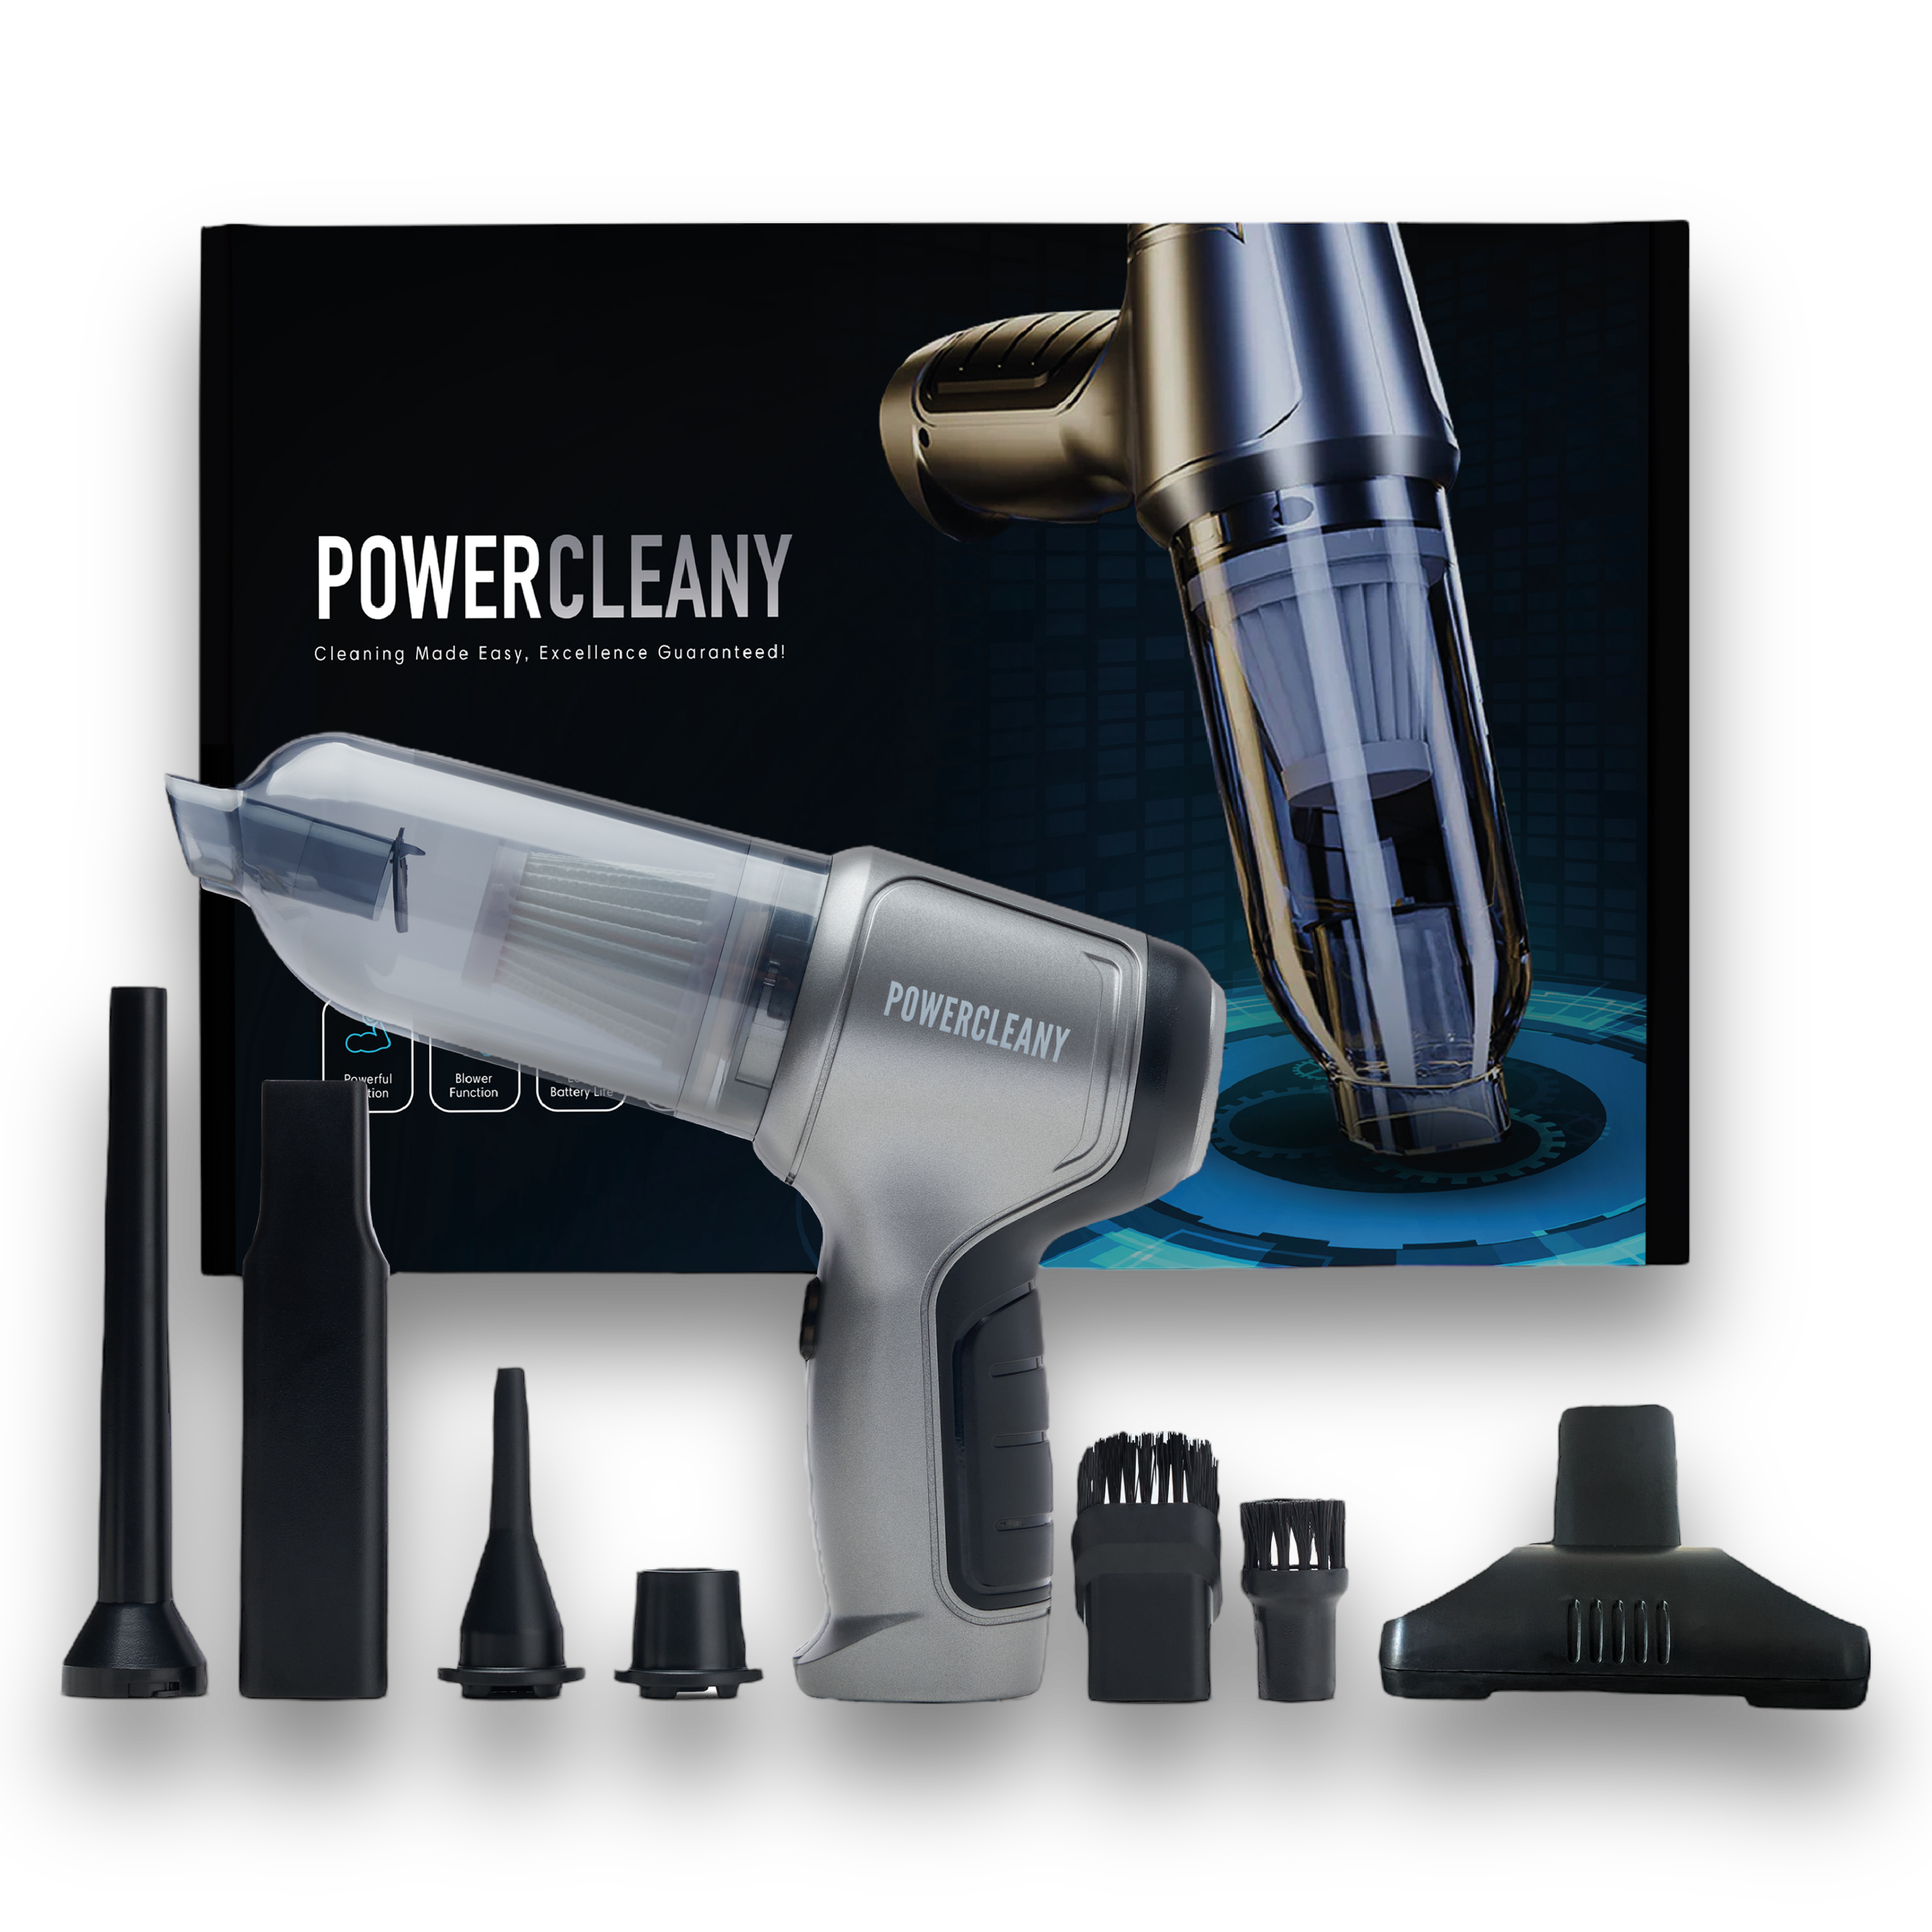 PowerCleany Vacuum Cleaner [Video]